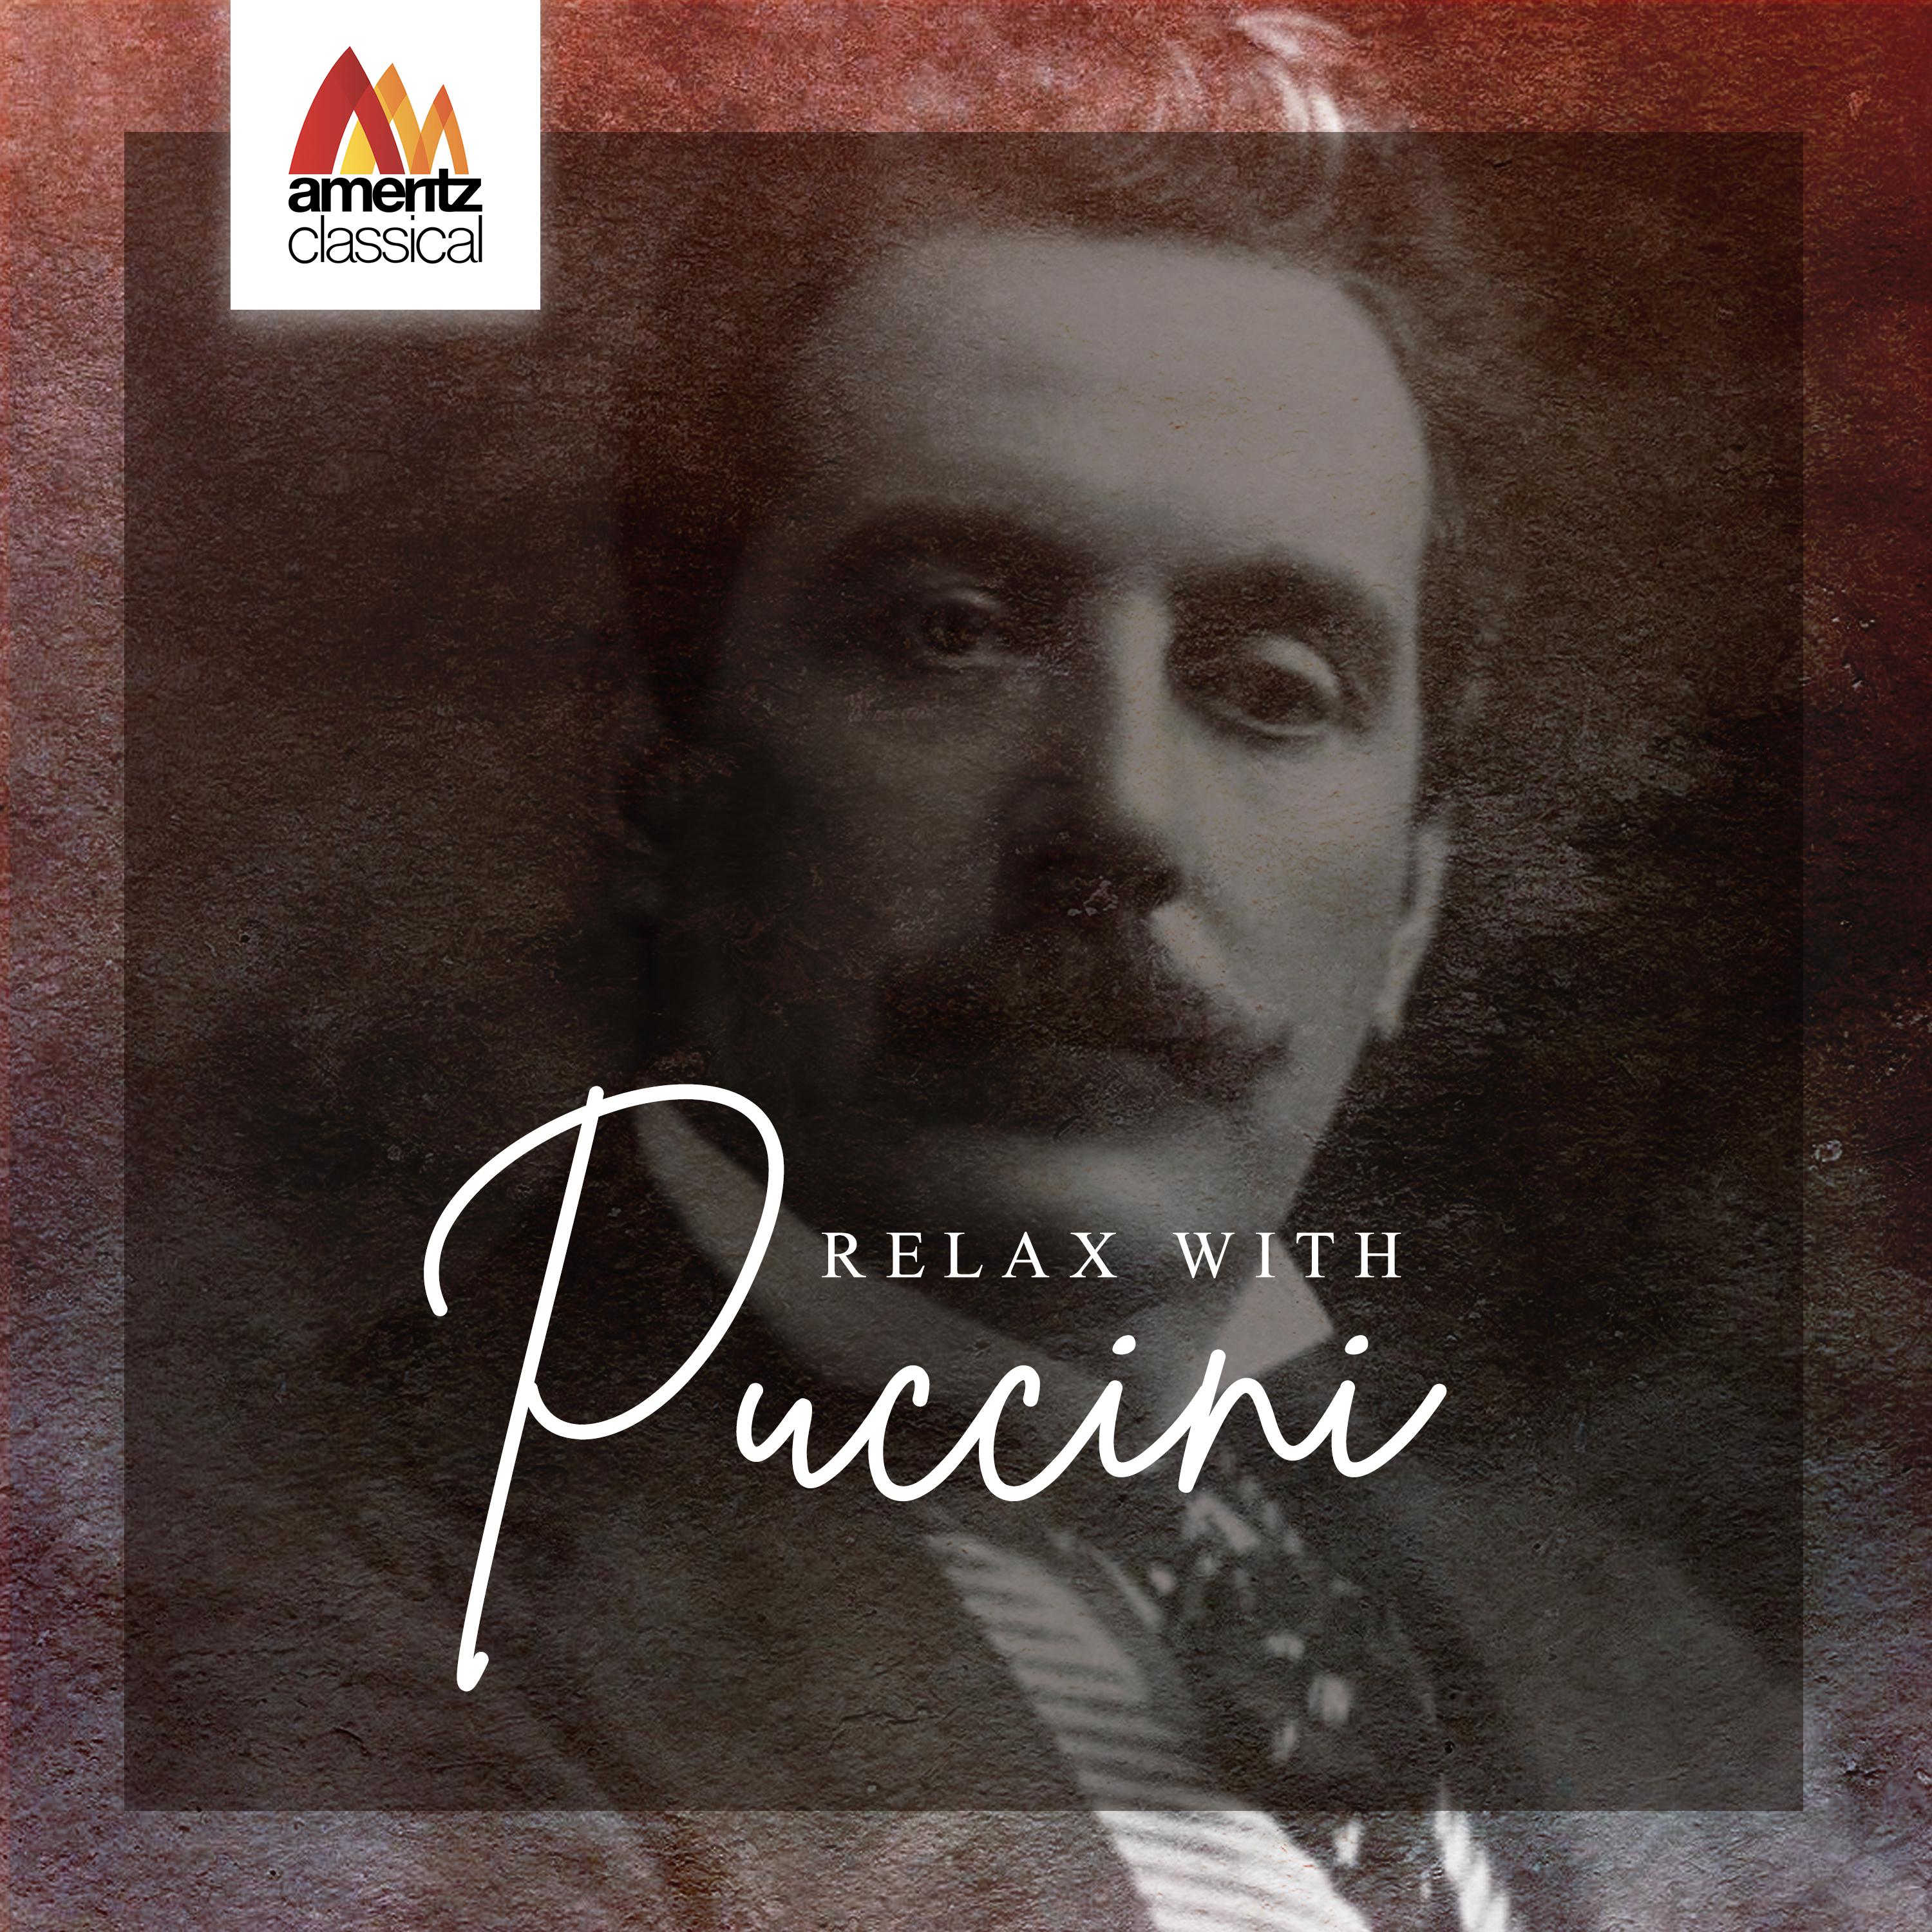 Relax with Puccini